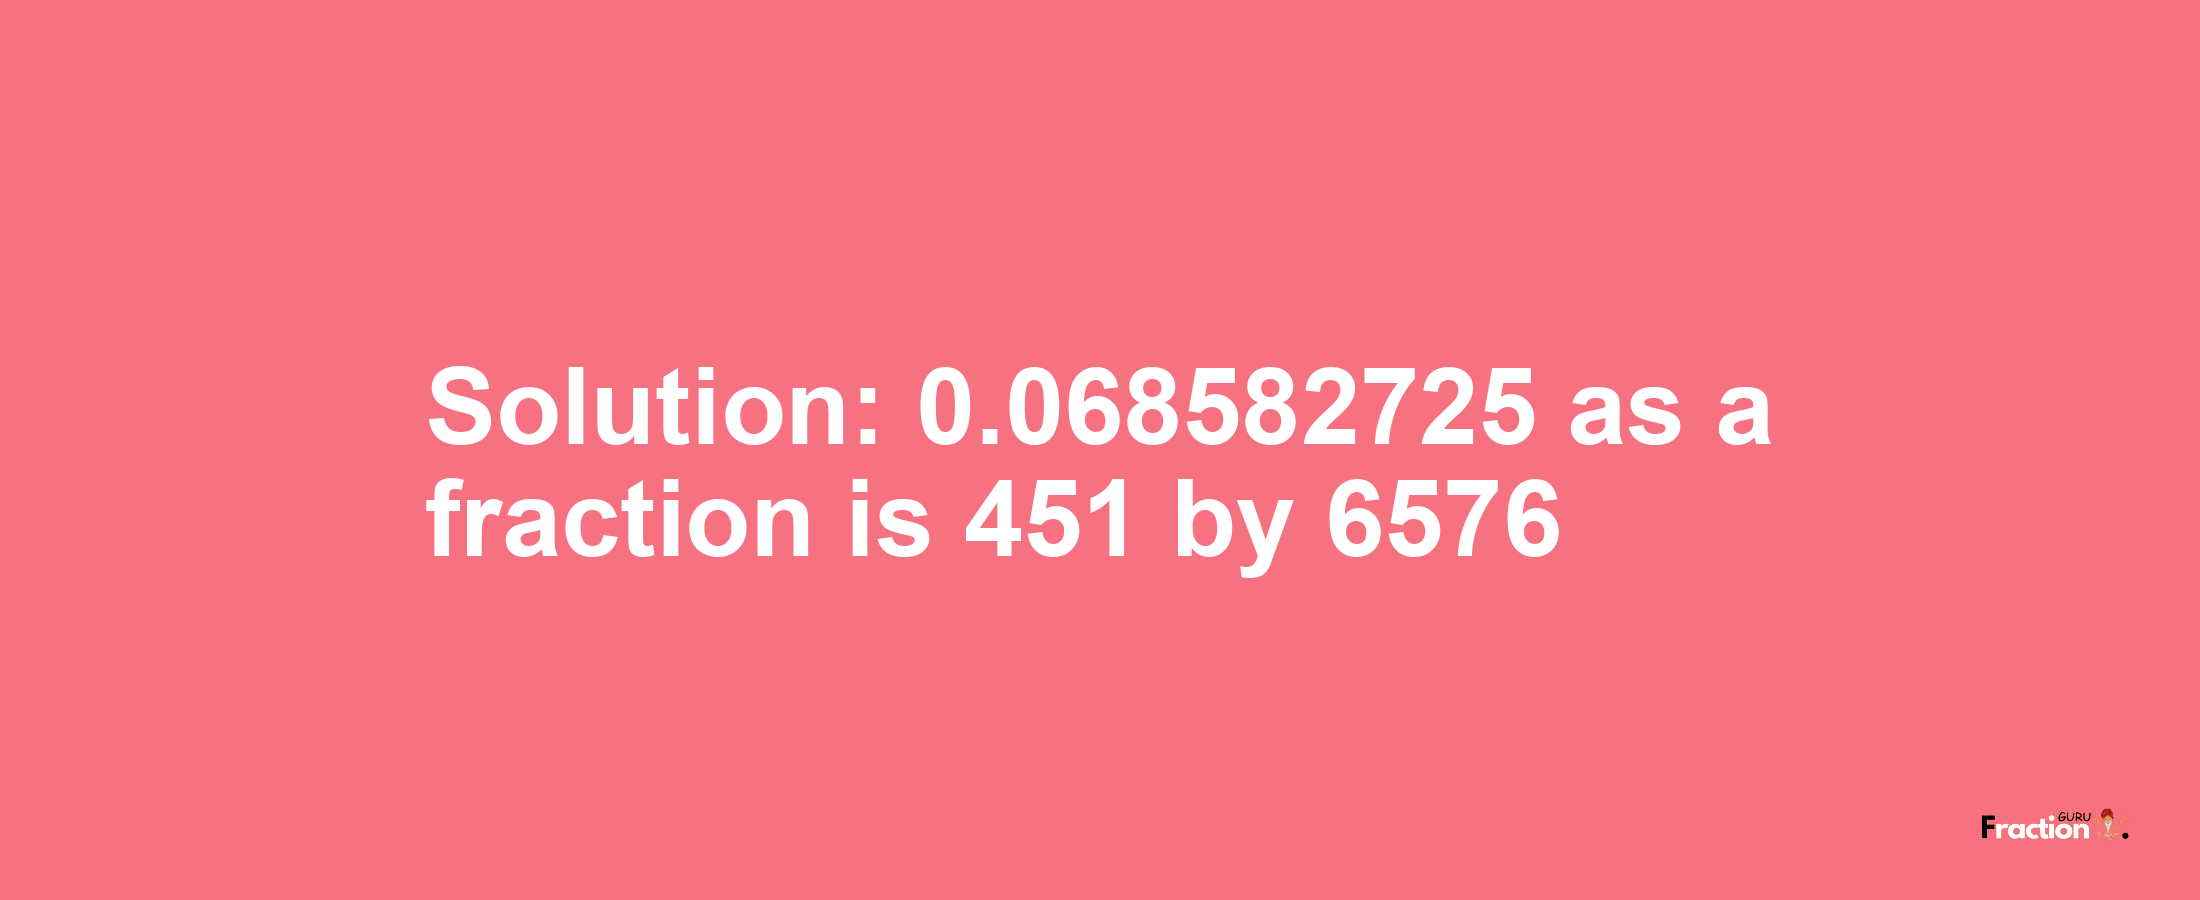 Solution:0.068582725 as a fraction is 451/6576